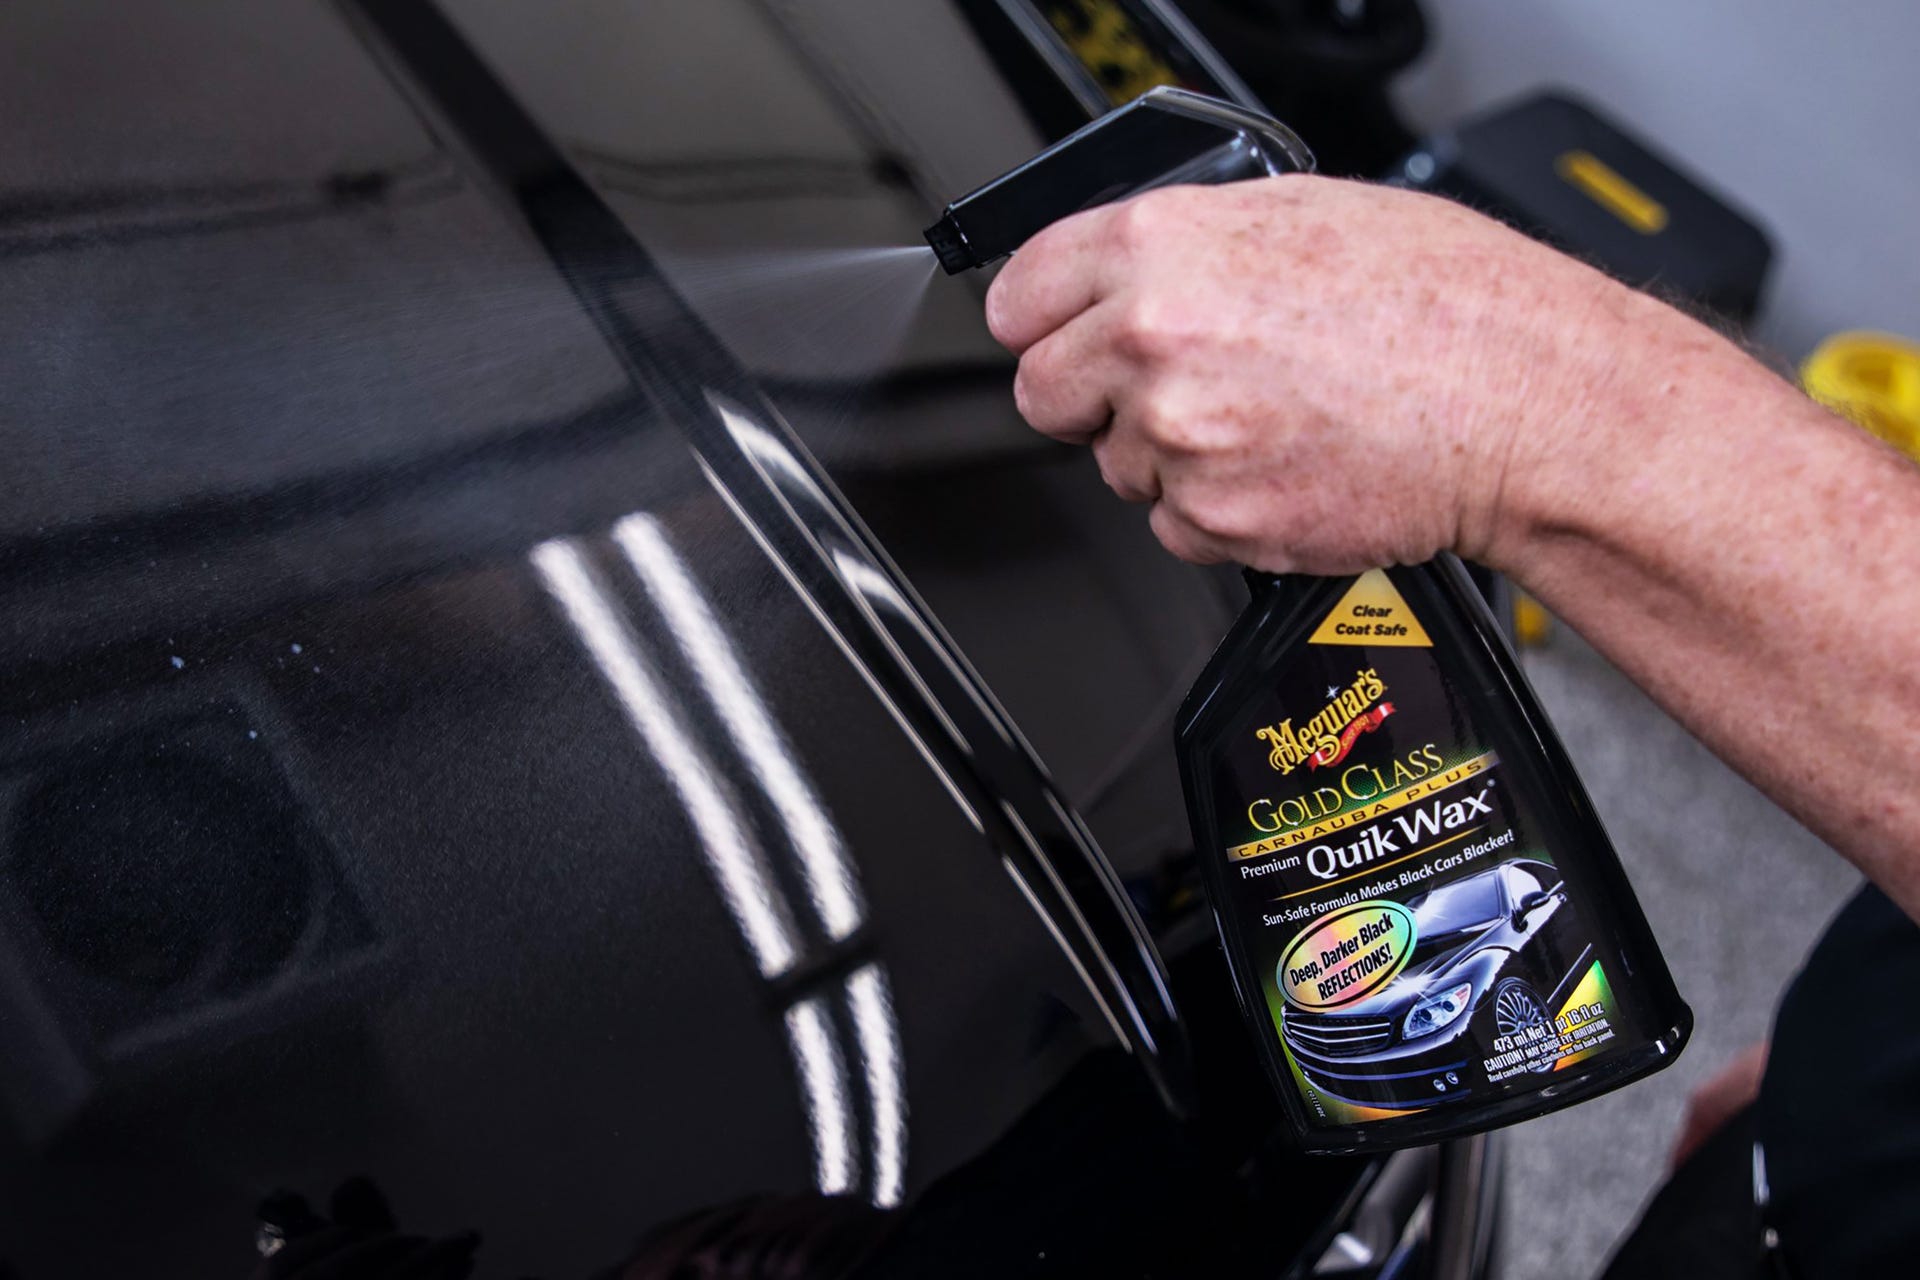 Why Does Meguiar's Make So Many Different Waxes?